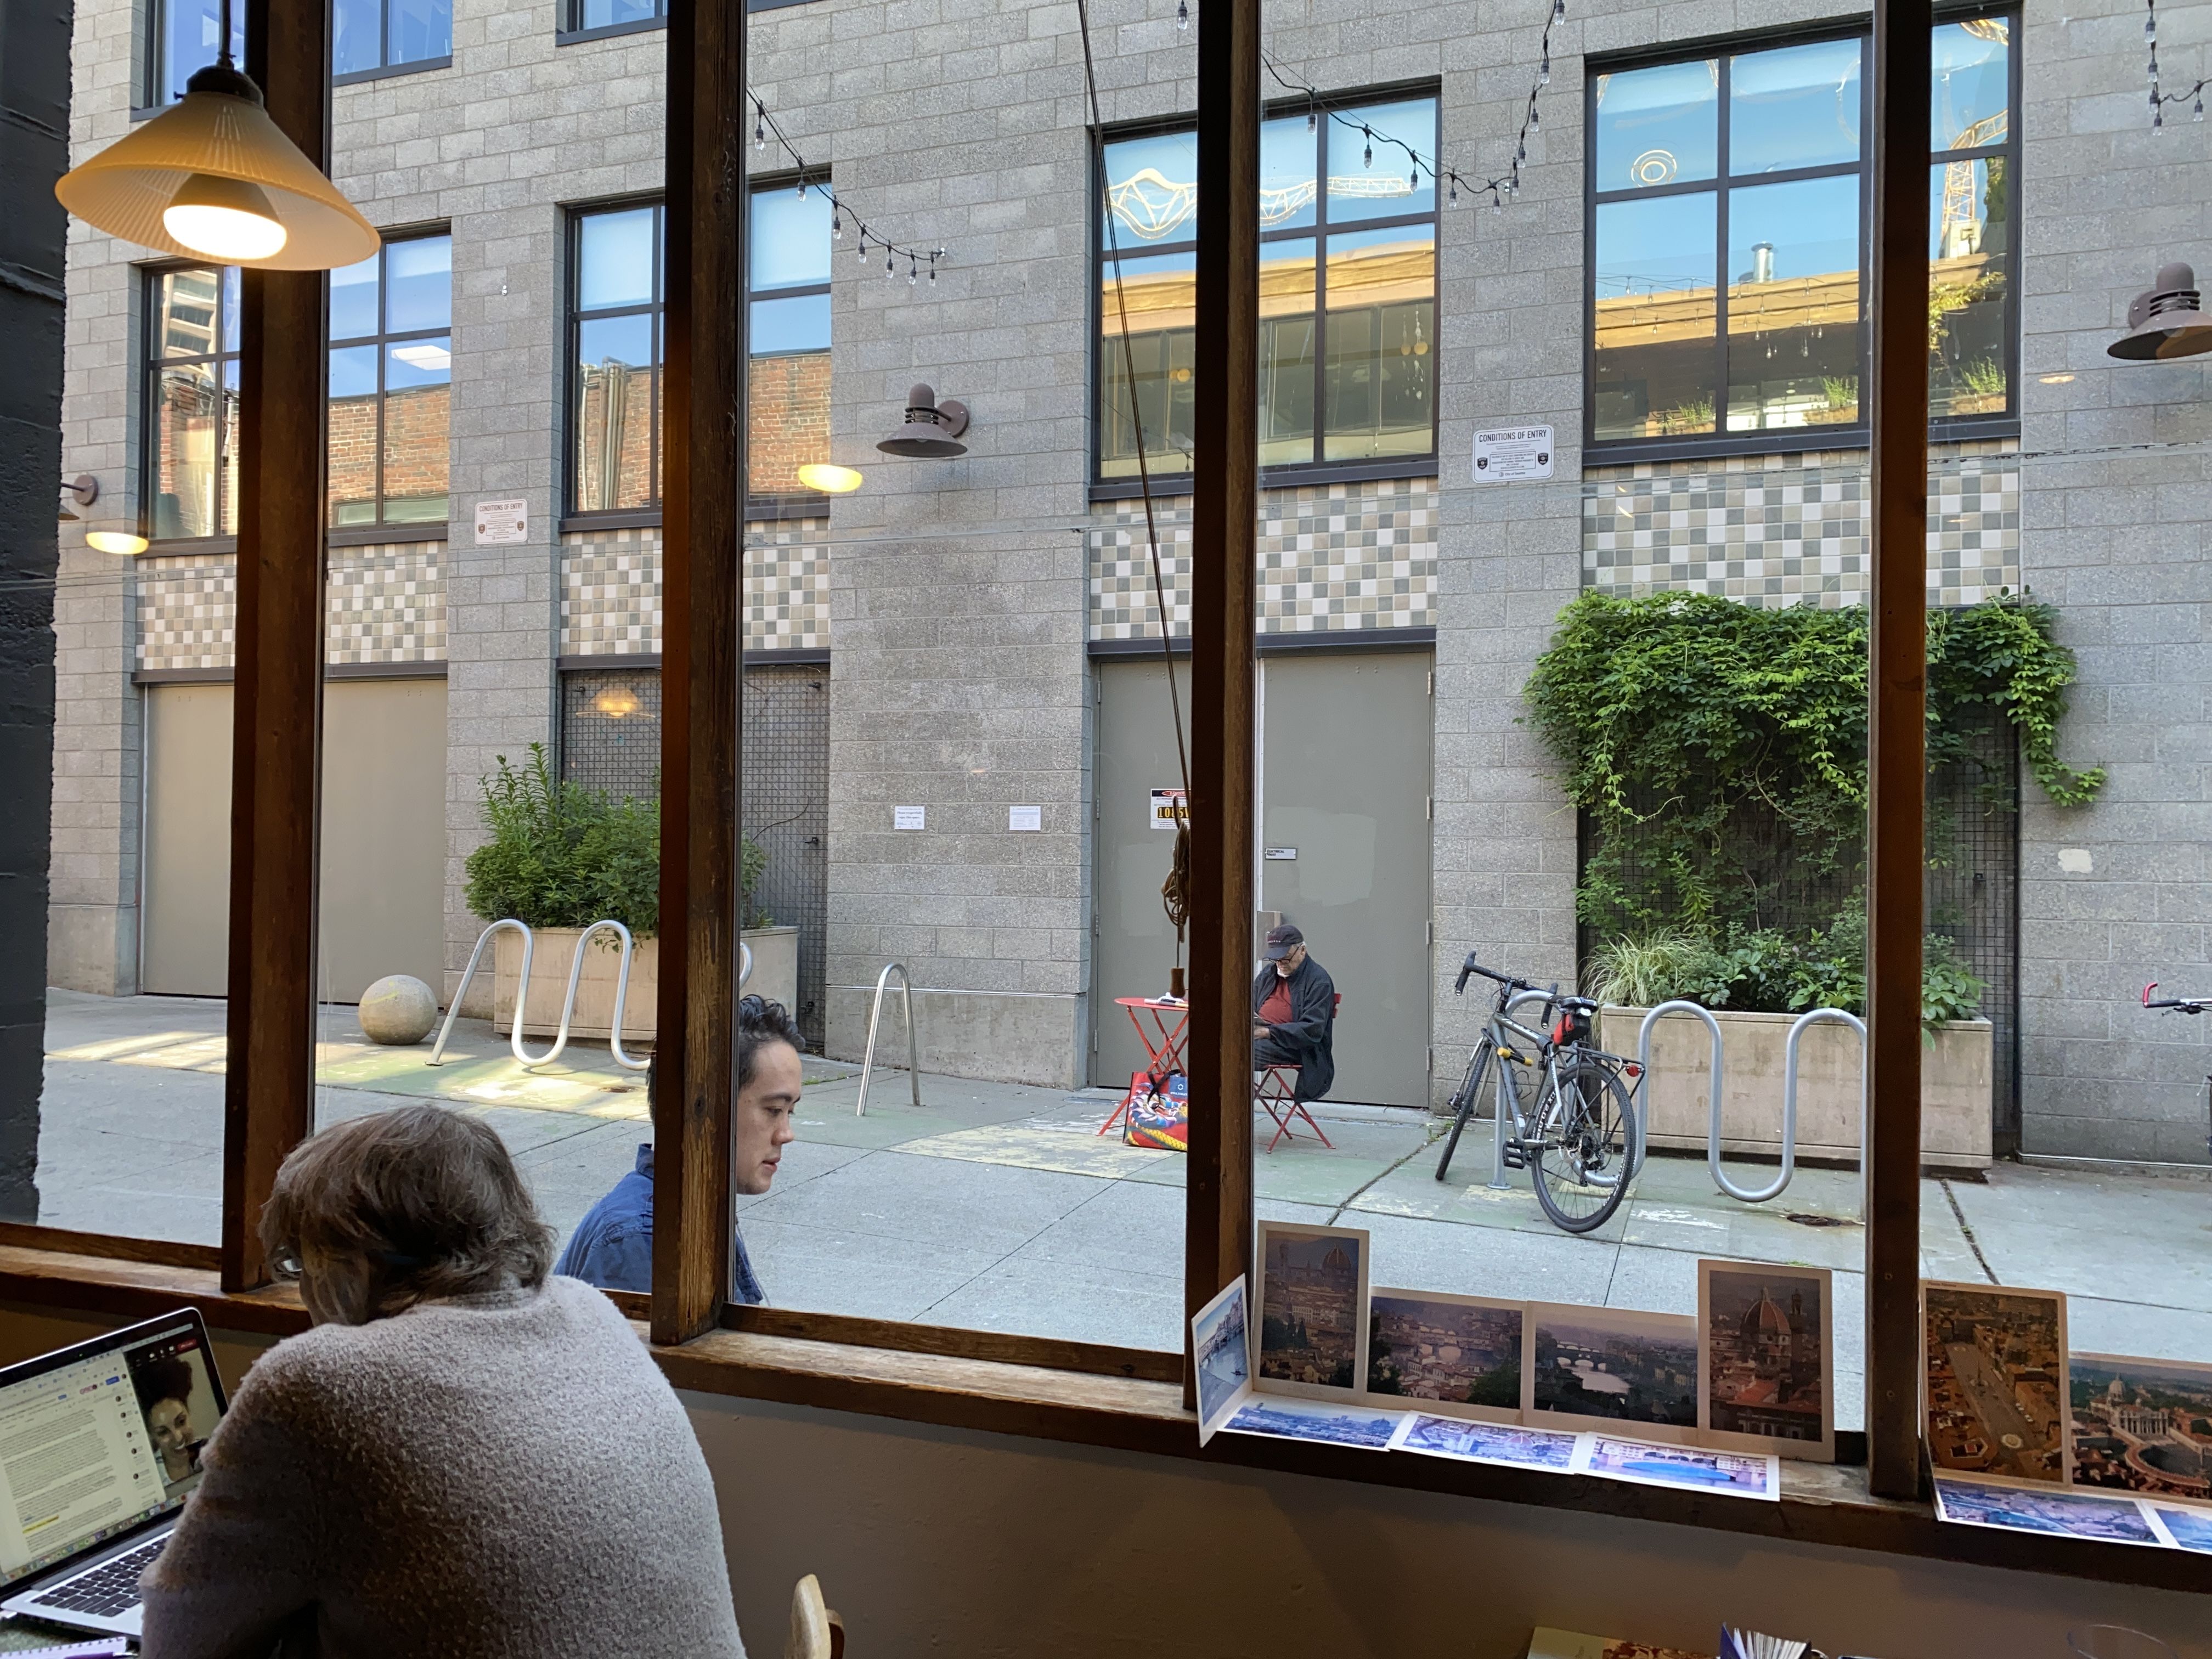 The view out the windows of Cafe Allegro, with the back of a man sitting in a chair in the foreground and a new-looking building across an alley.